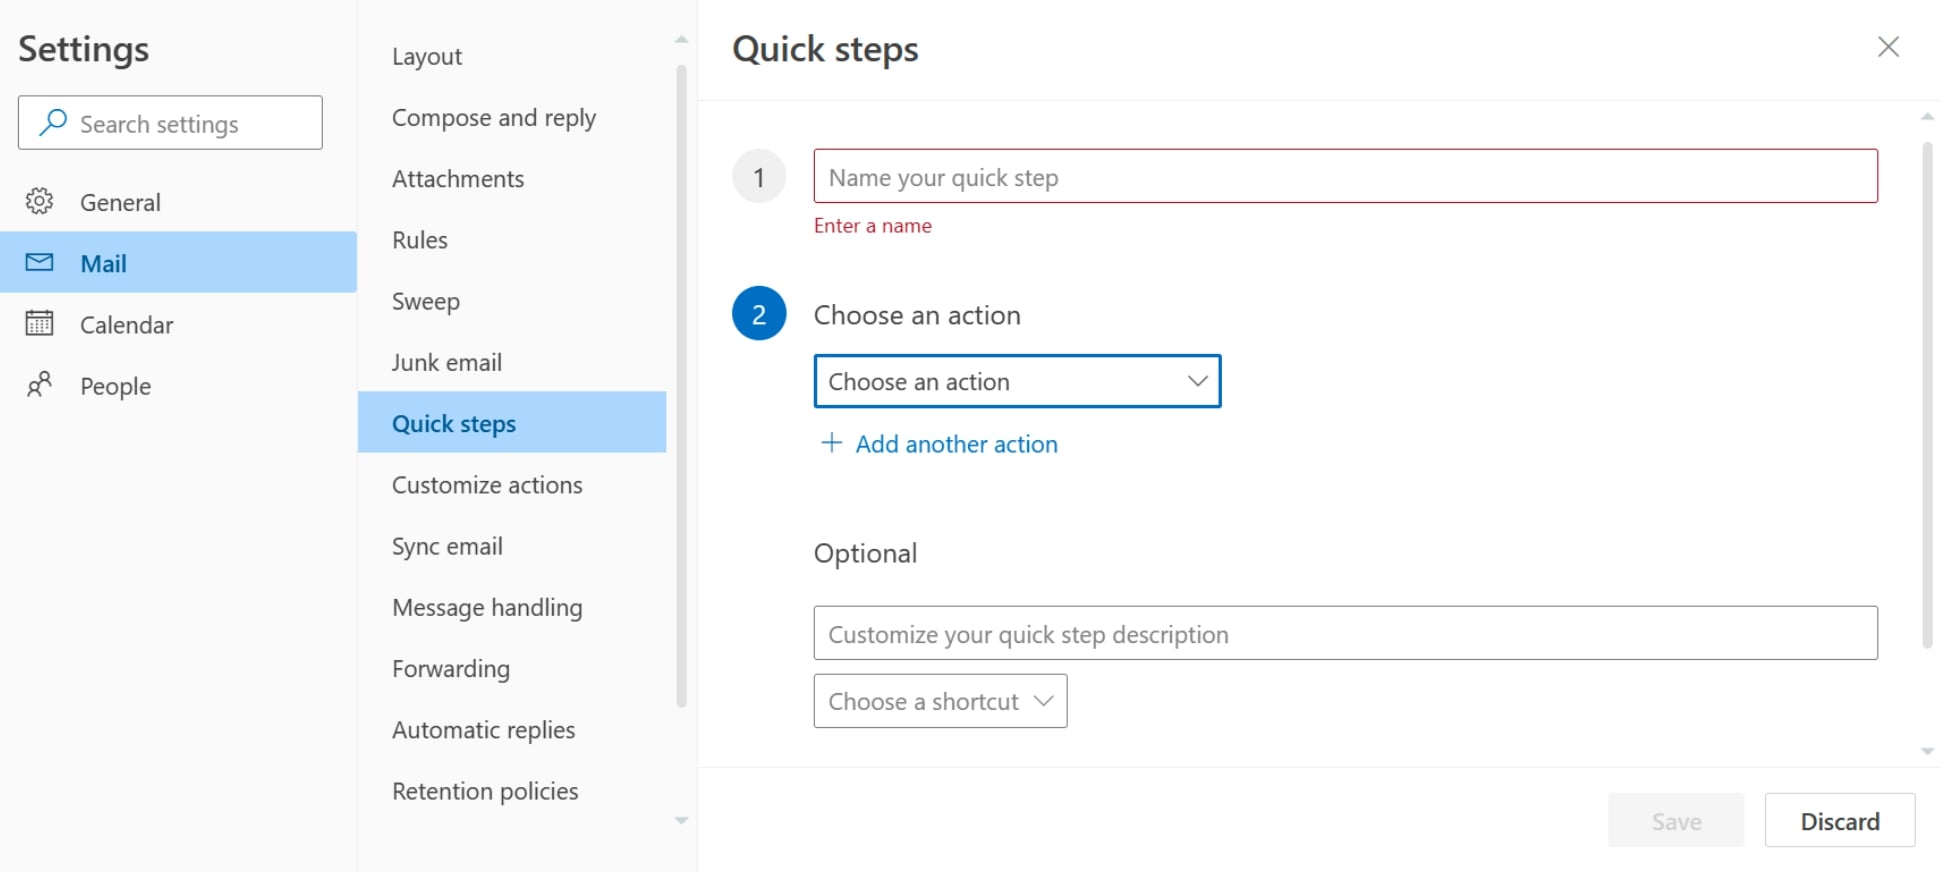 How to Create a Quick Step in Microsoft Outlook